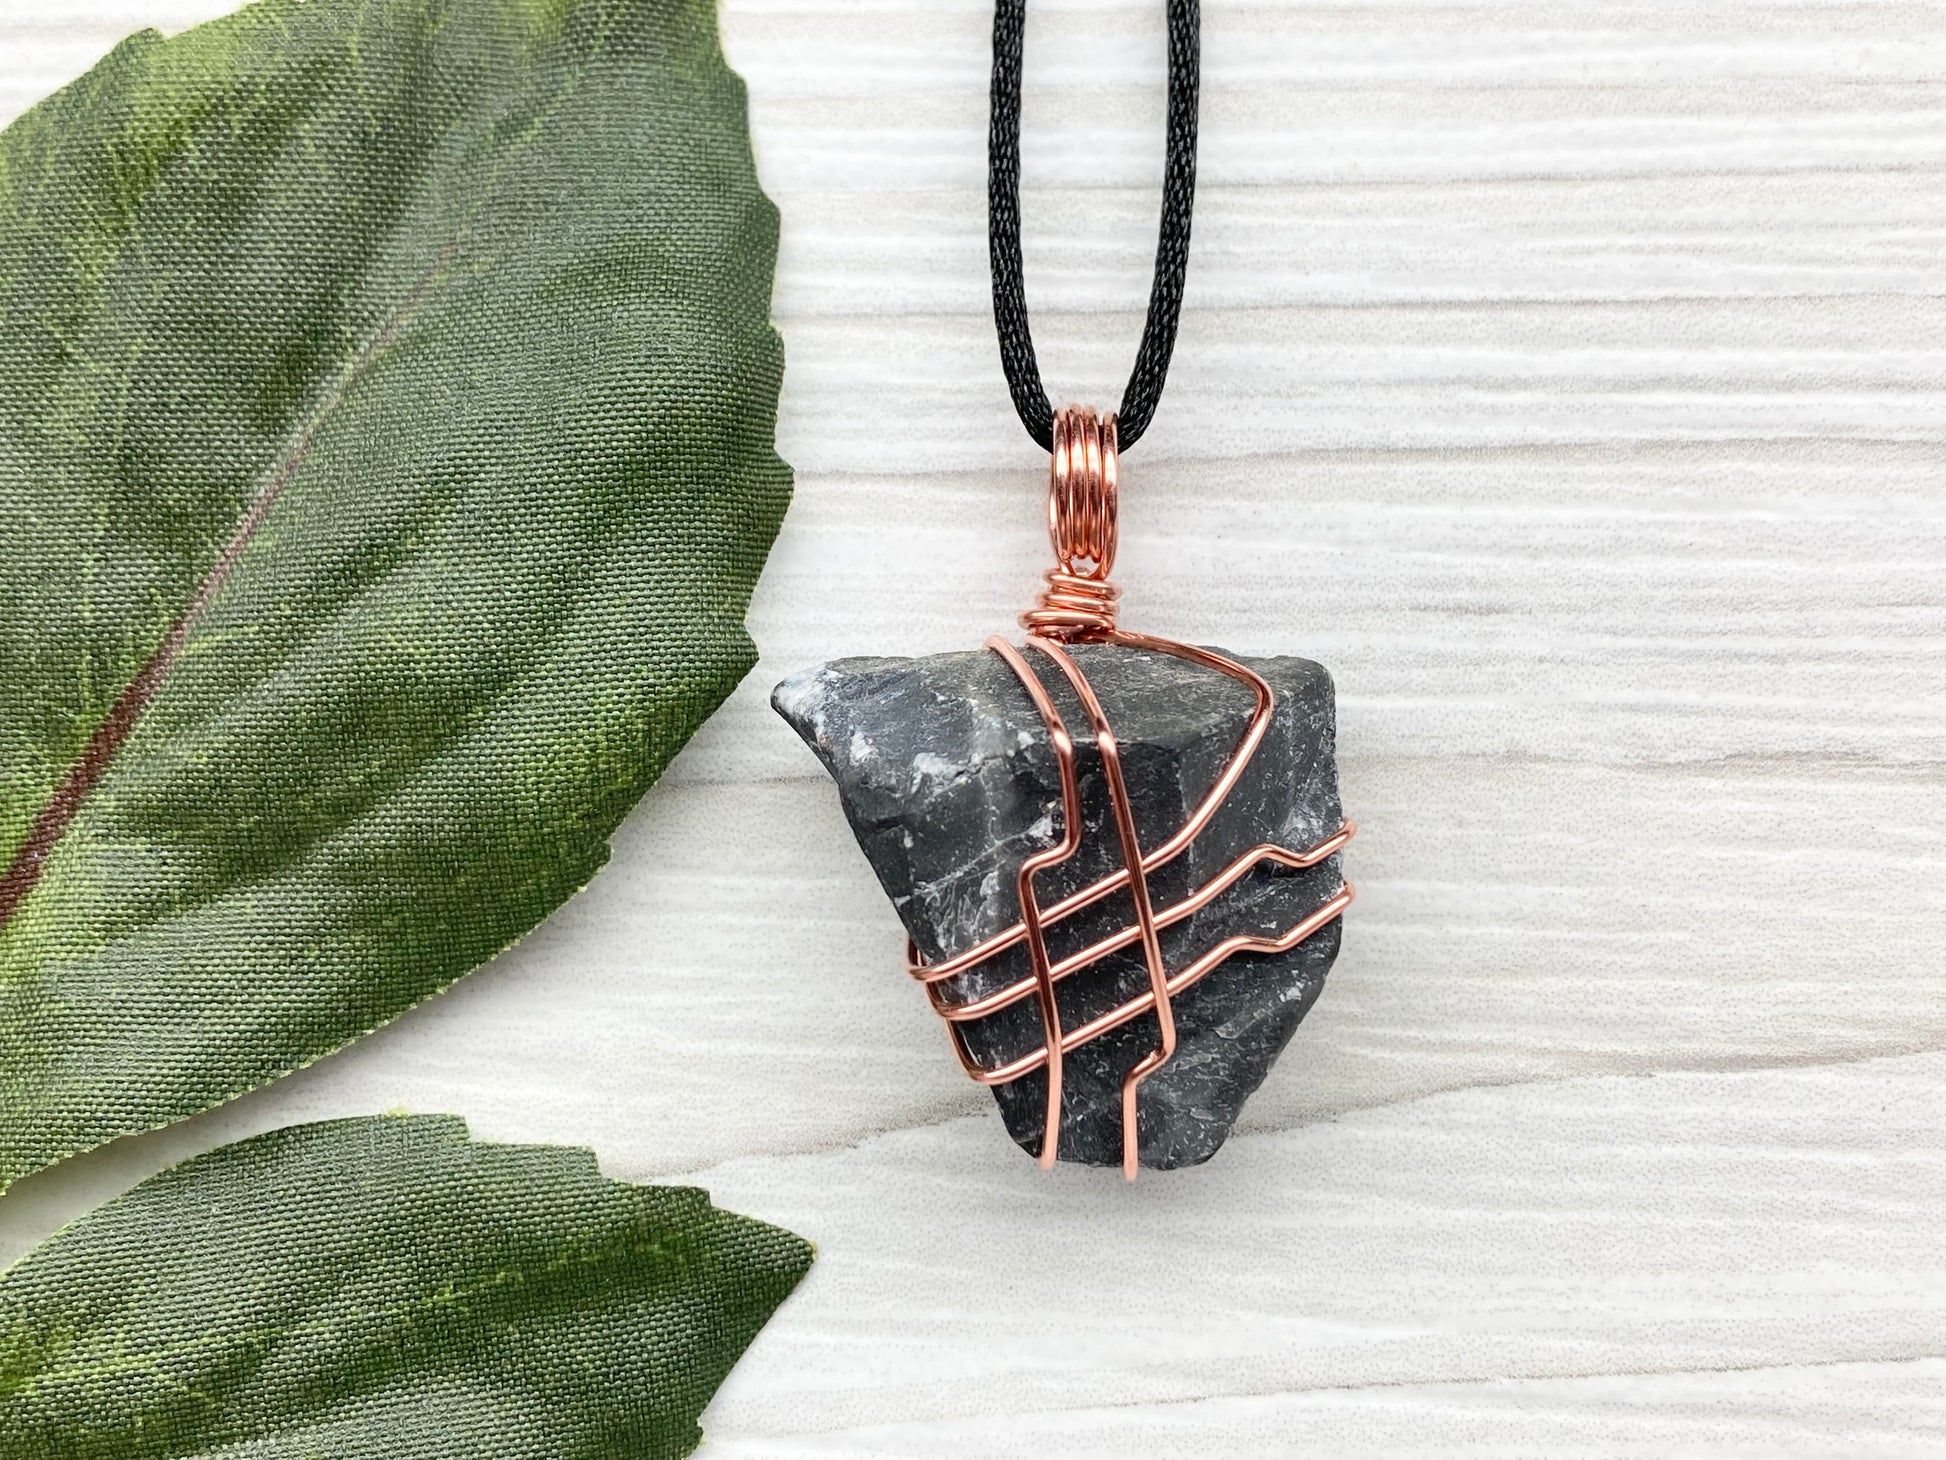 Raw Black Onyx Necklace. Rough Crystal Wrapped With Copper Wire. Comes On A Black Chain. New Age Boho Style Jewelry.